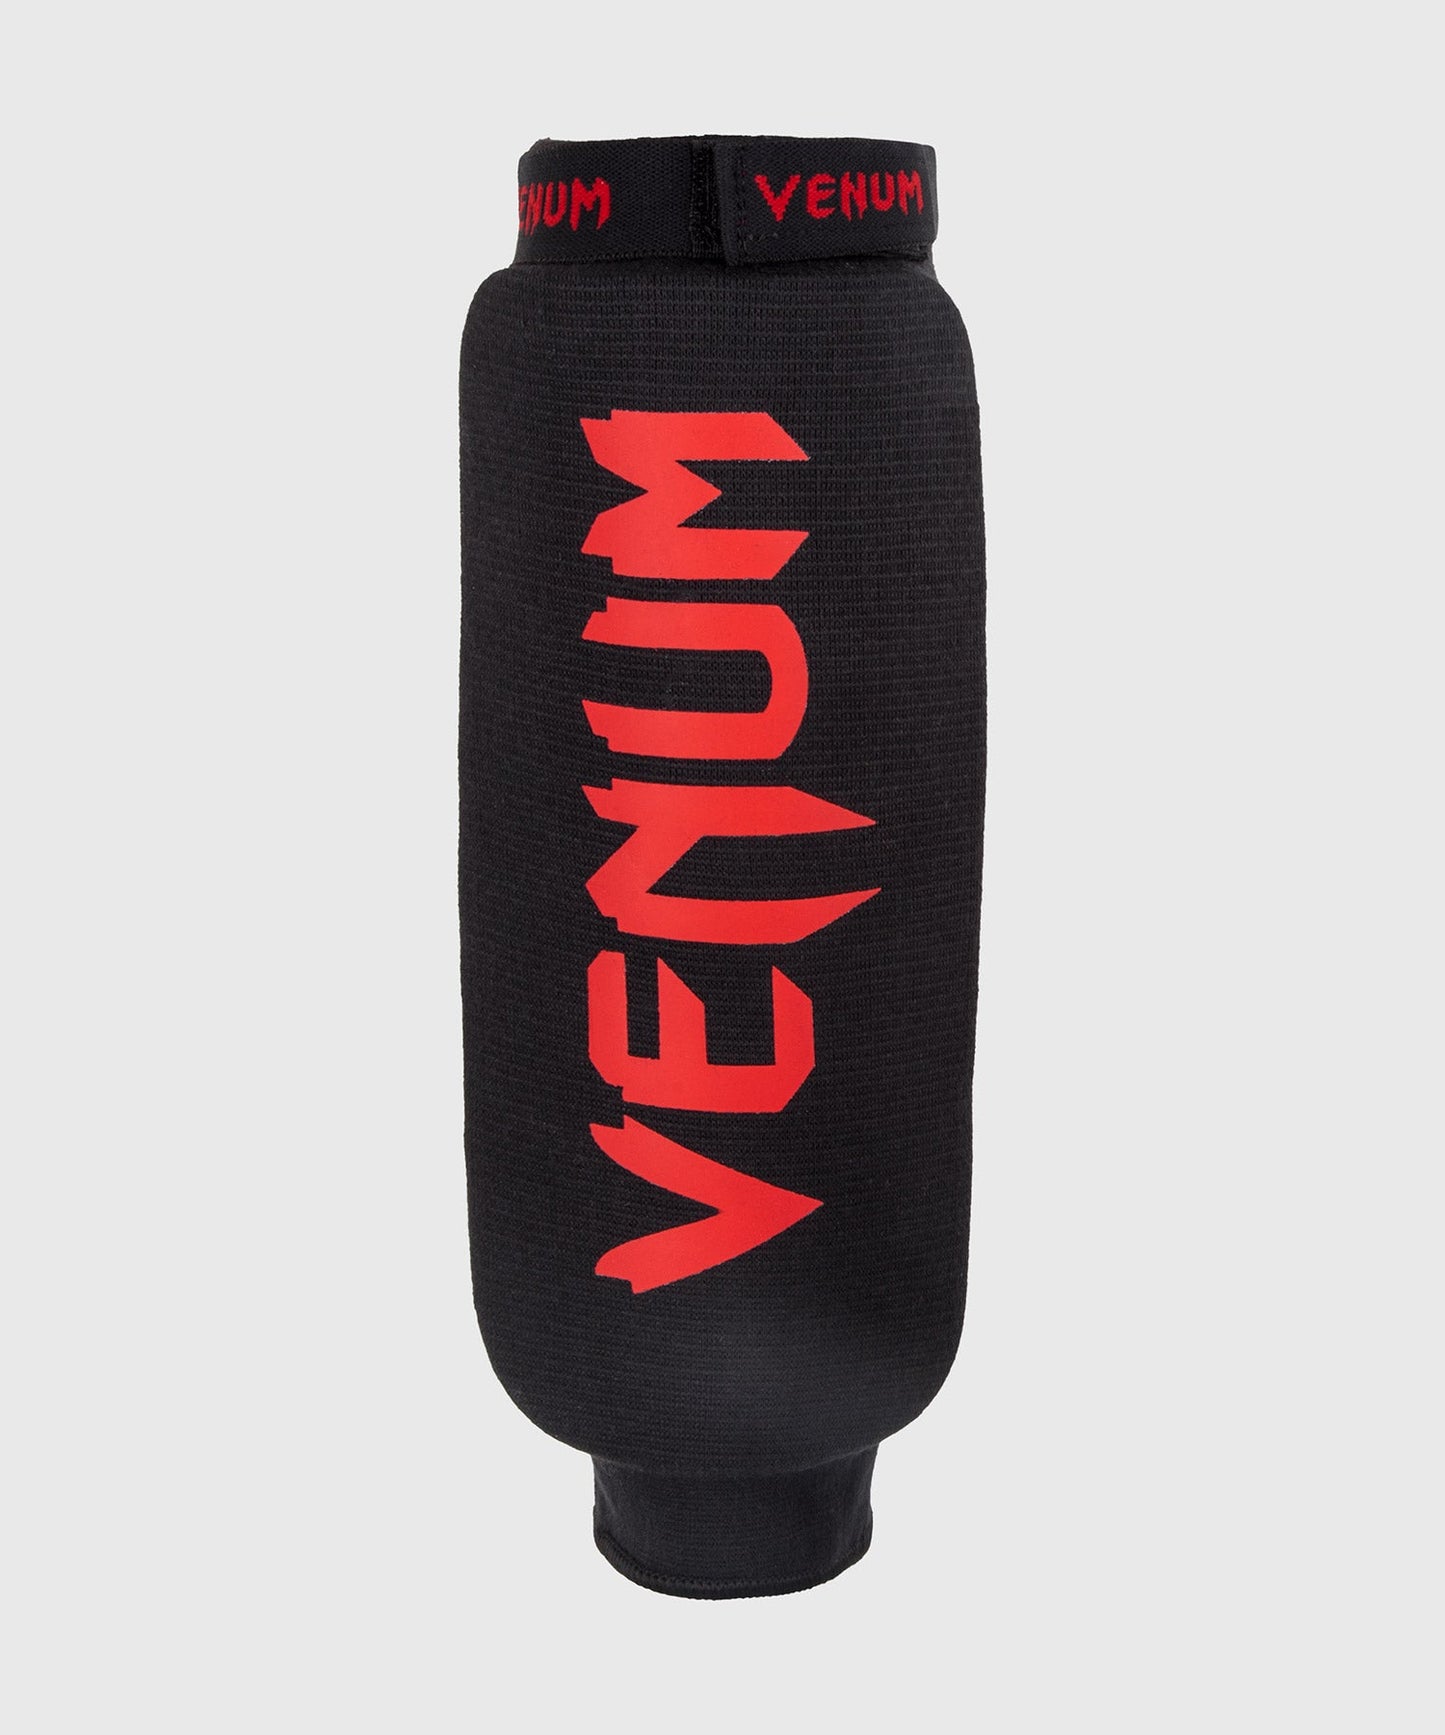 Venum Shin guards Kontact Without Foot - Black/Red